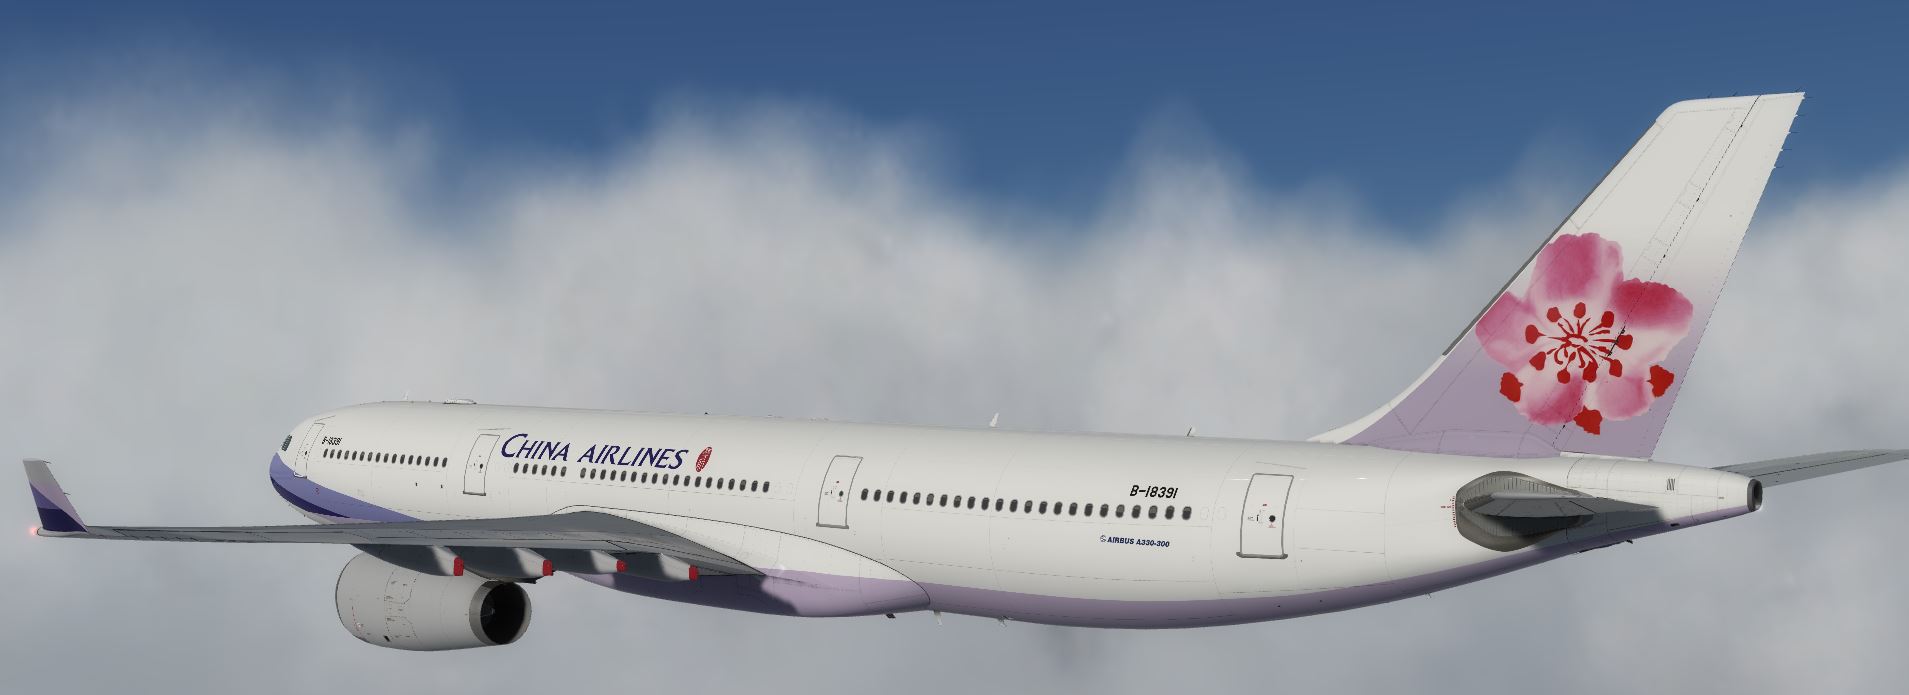 AS A330 ChinaAirline-5384 